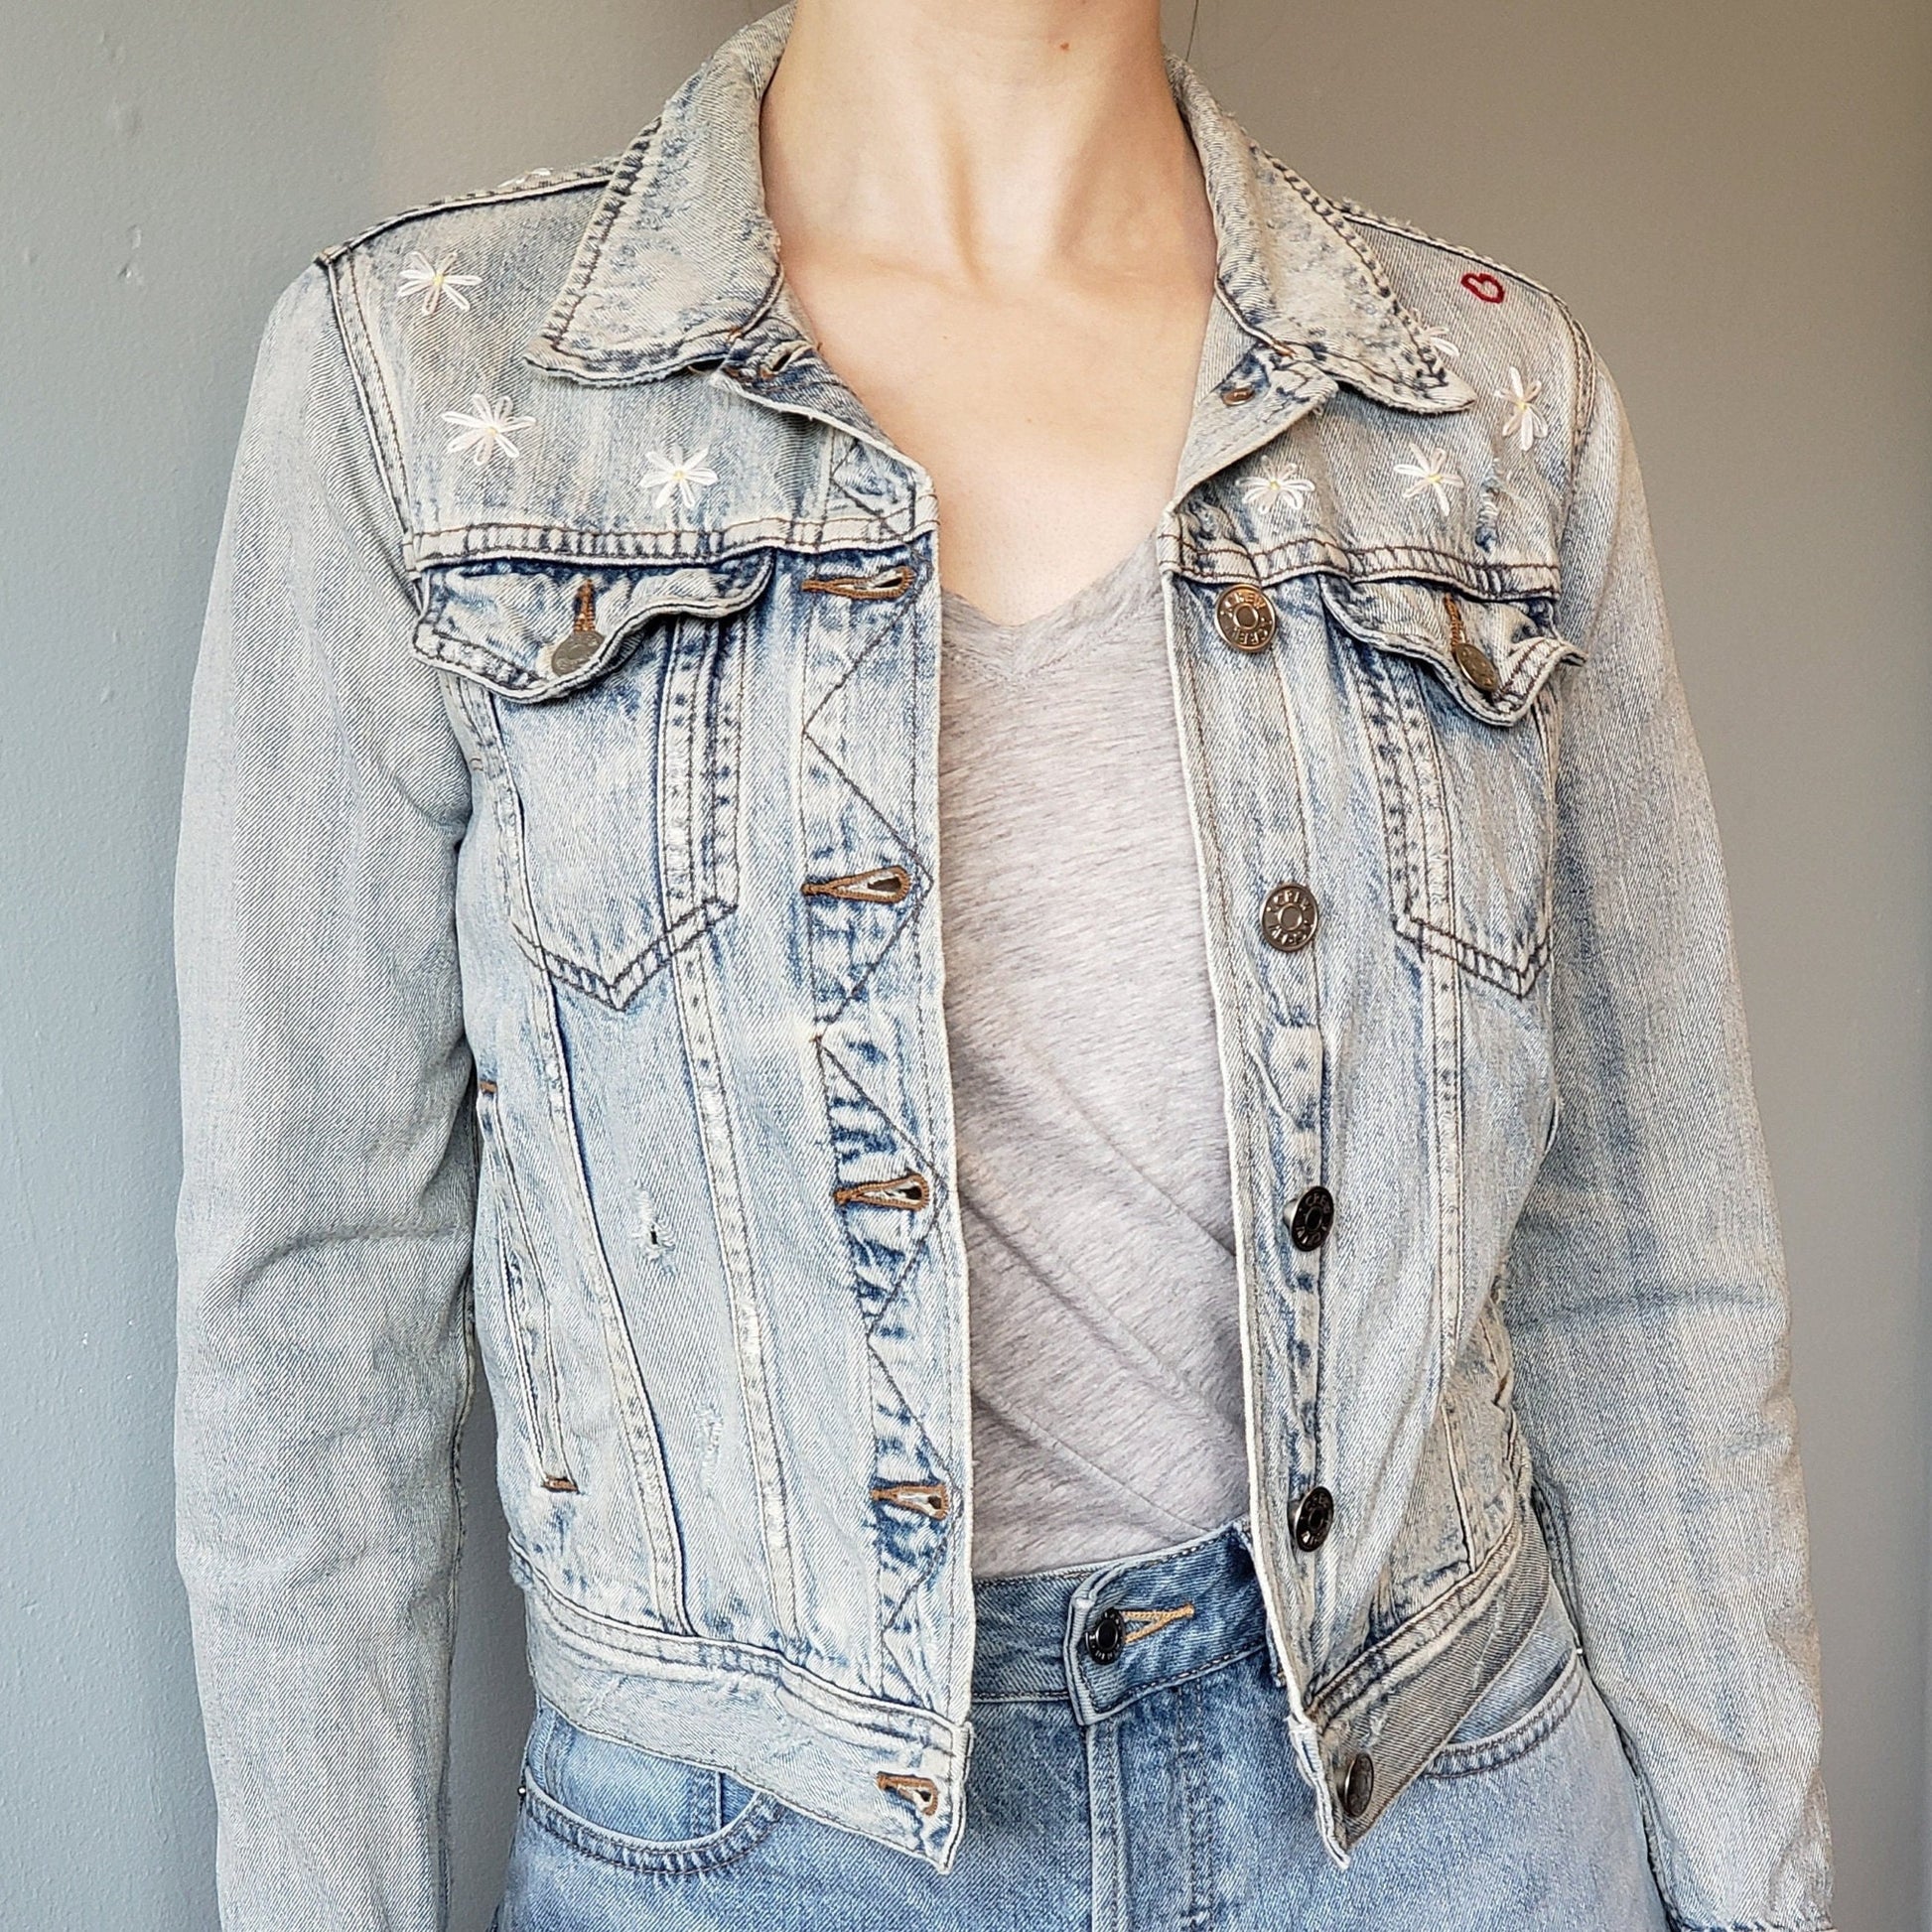 A woman wears an open acid wash denim jacket with daisies covering the upper section of the jacket. A small heart is on the left shoulder. The jacket ends at her upper hip.